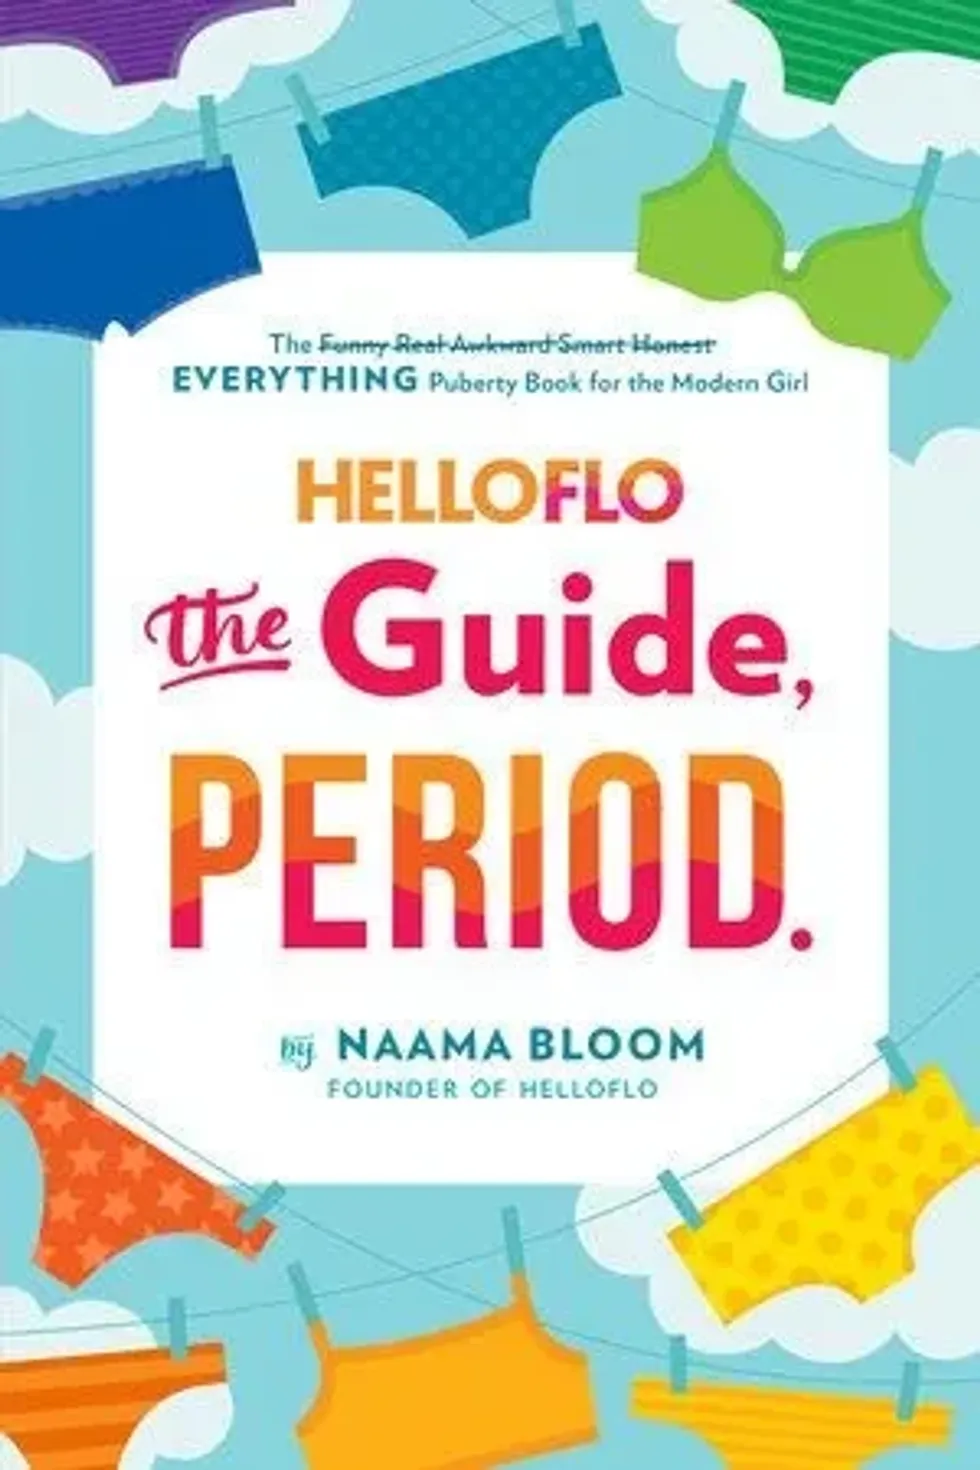 HelloFlo: The Guide, Period. By Naama Bloom.